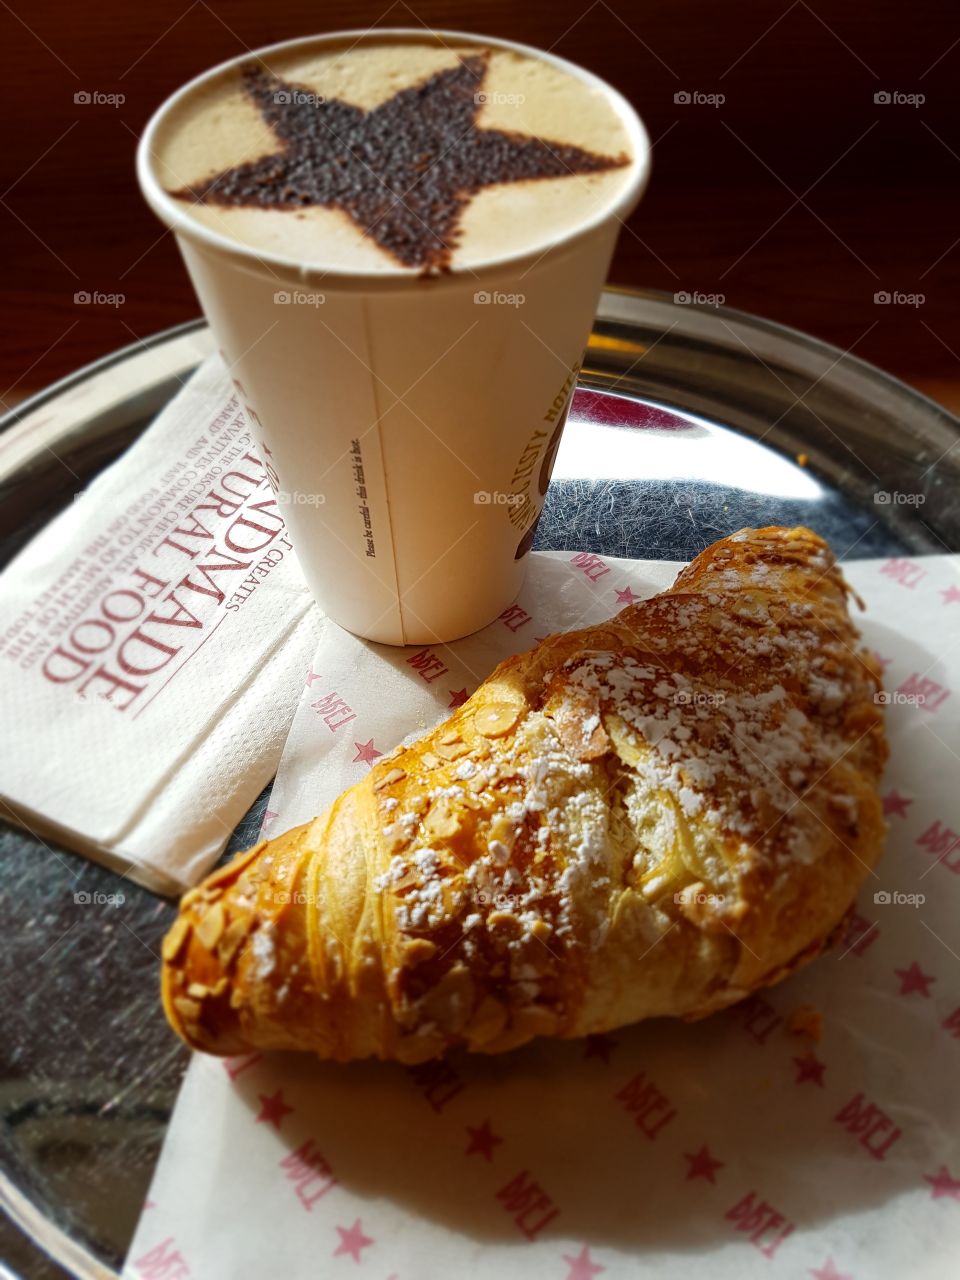 Cappuccino and almond croissant